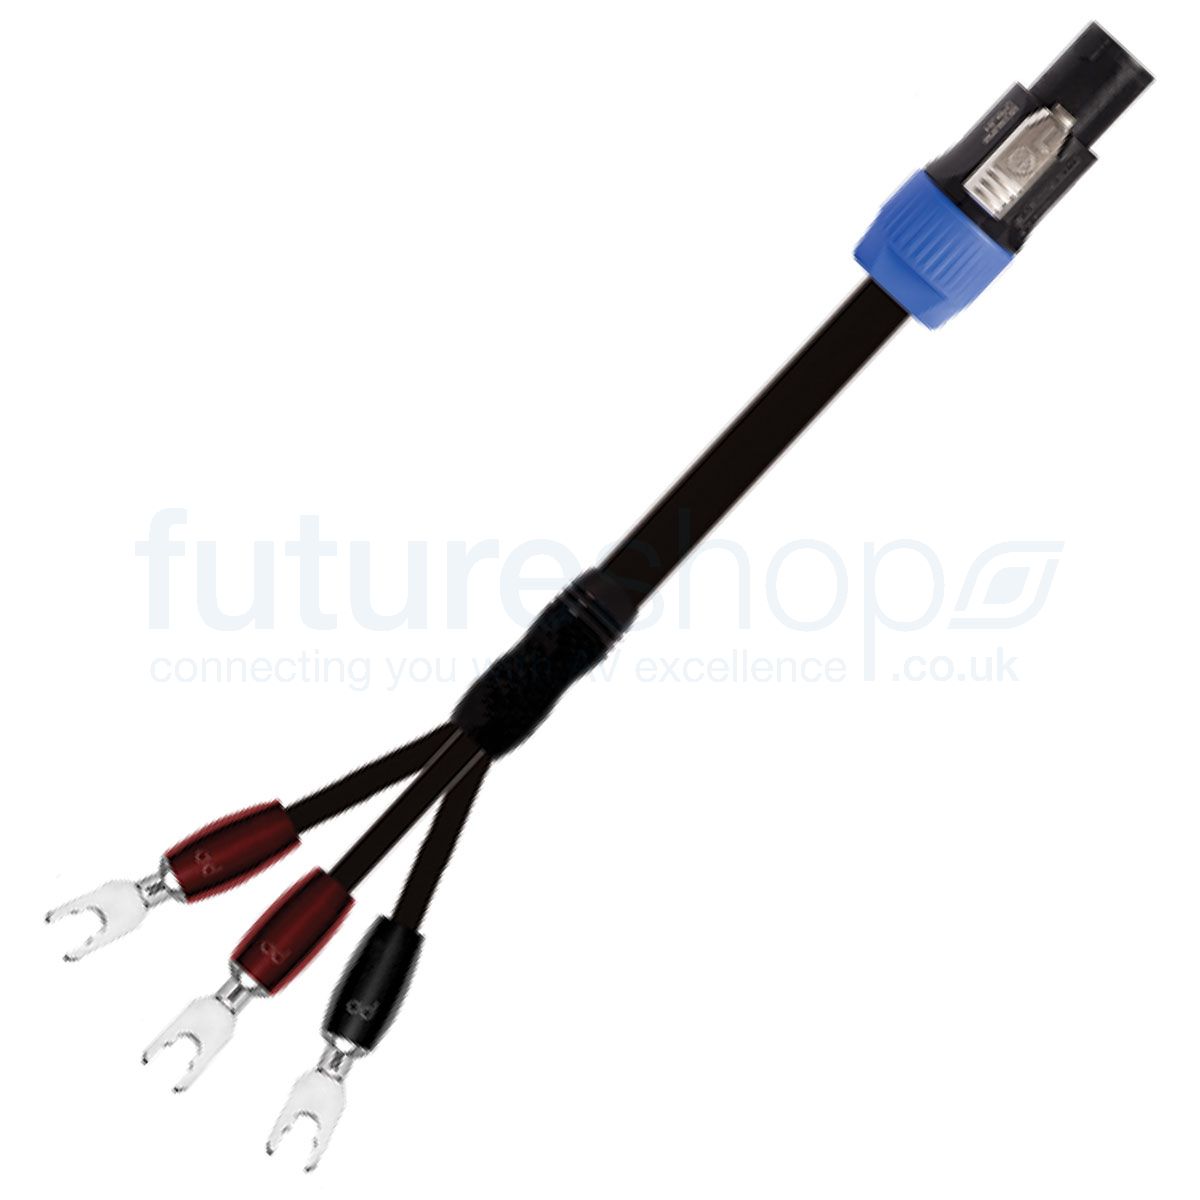 Mediator Ulempe kuffert AudioQuest Type 5 REL Acoustics Stereo High-Level Subwoofer Cable